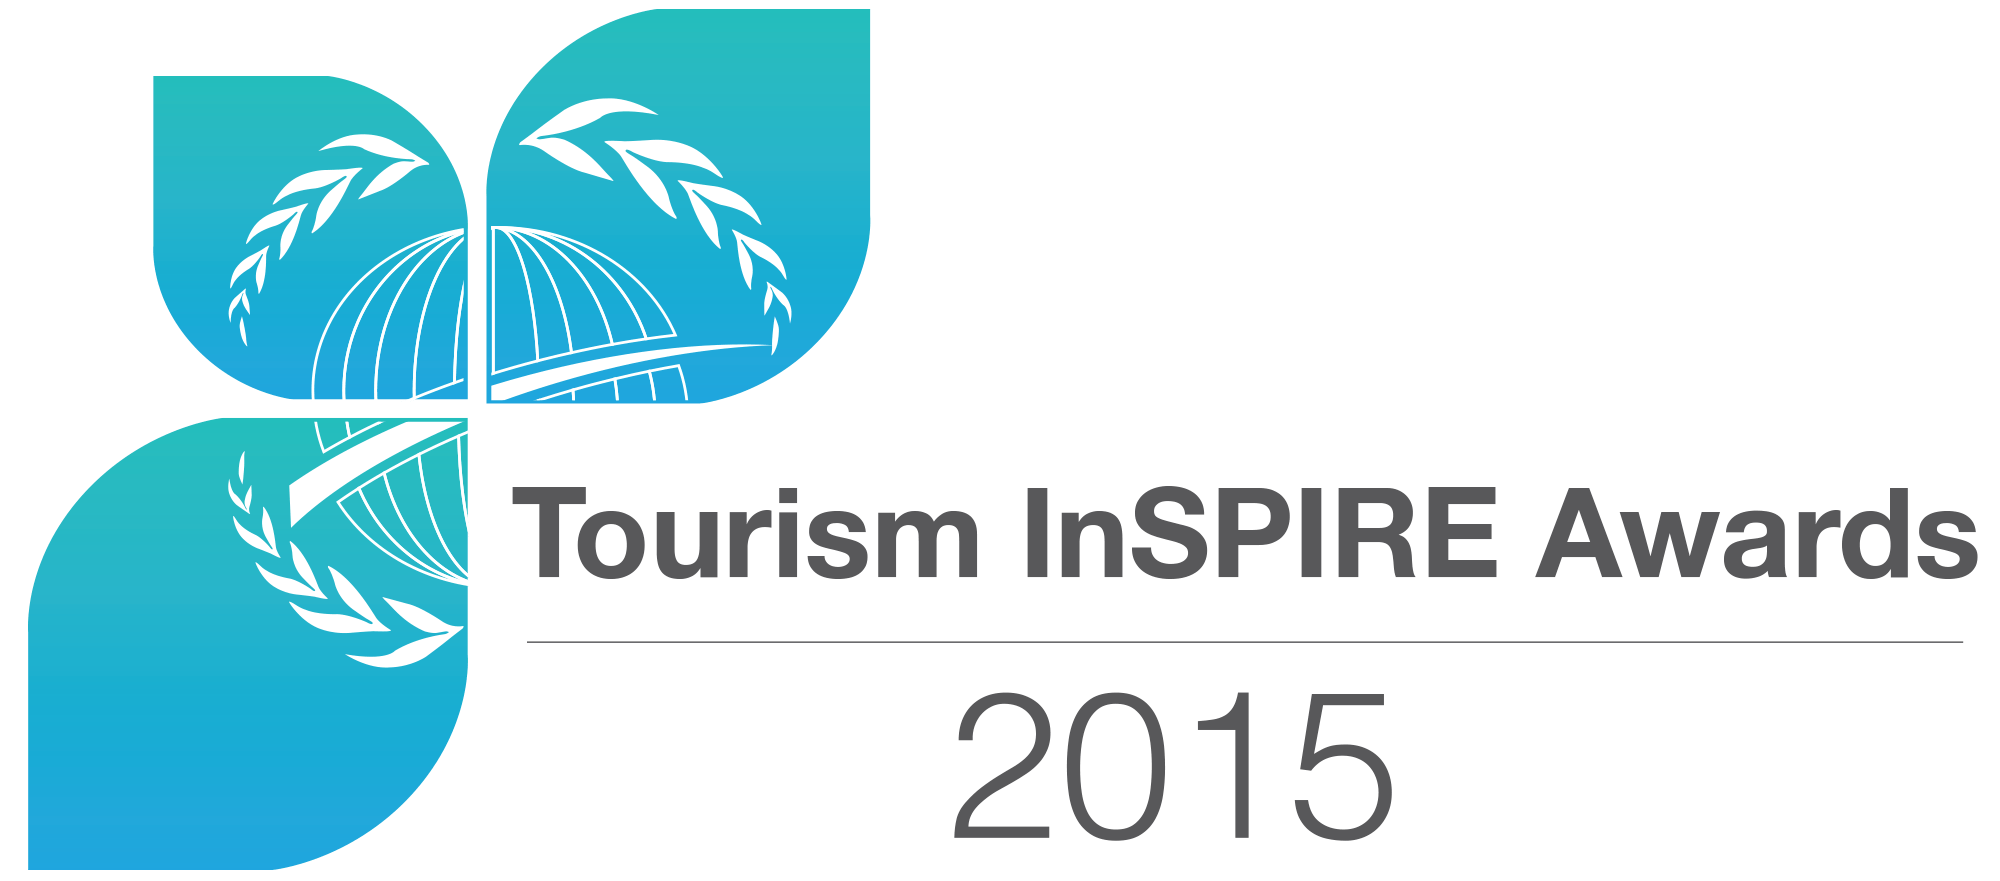 Pata Logo - PATA launches Tourism InSPIRE Awards 2015 | Global Sustainable ...